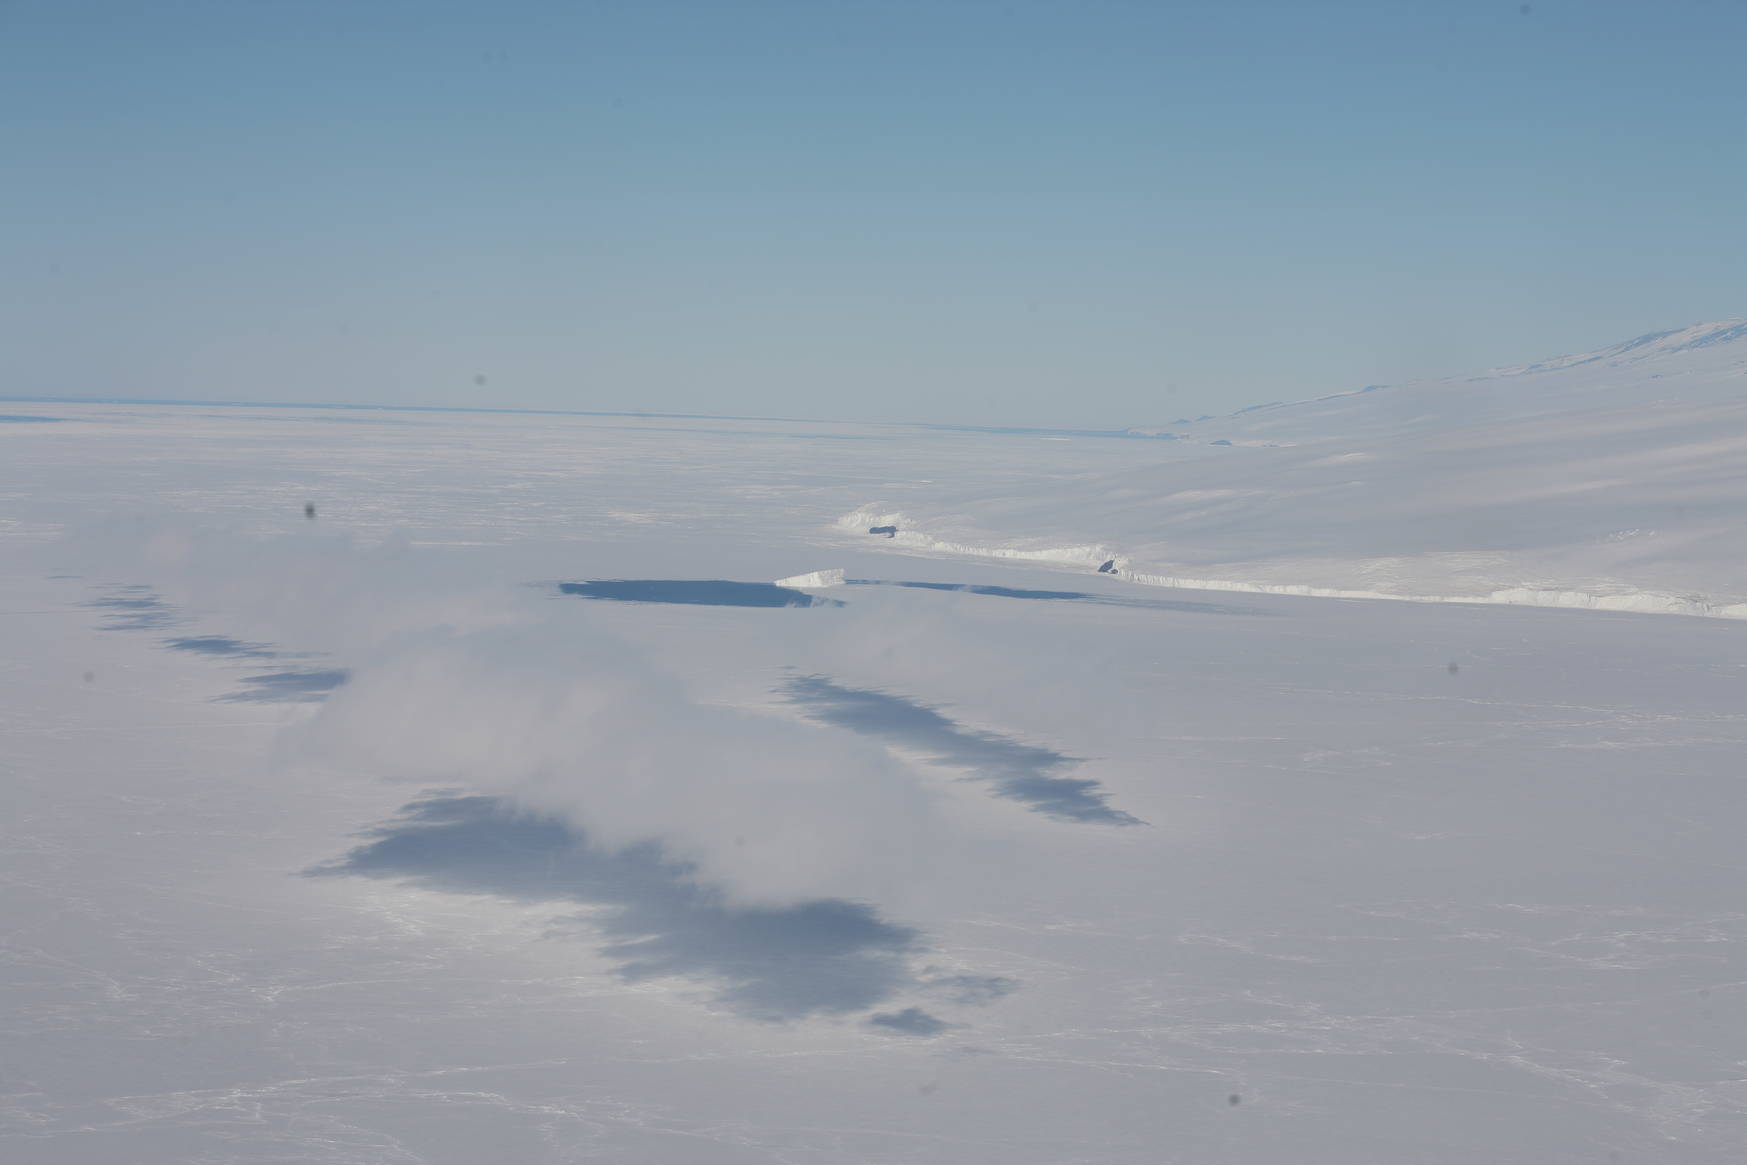 Low-hanging clouds above the Antarctic coast.